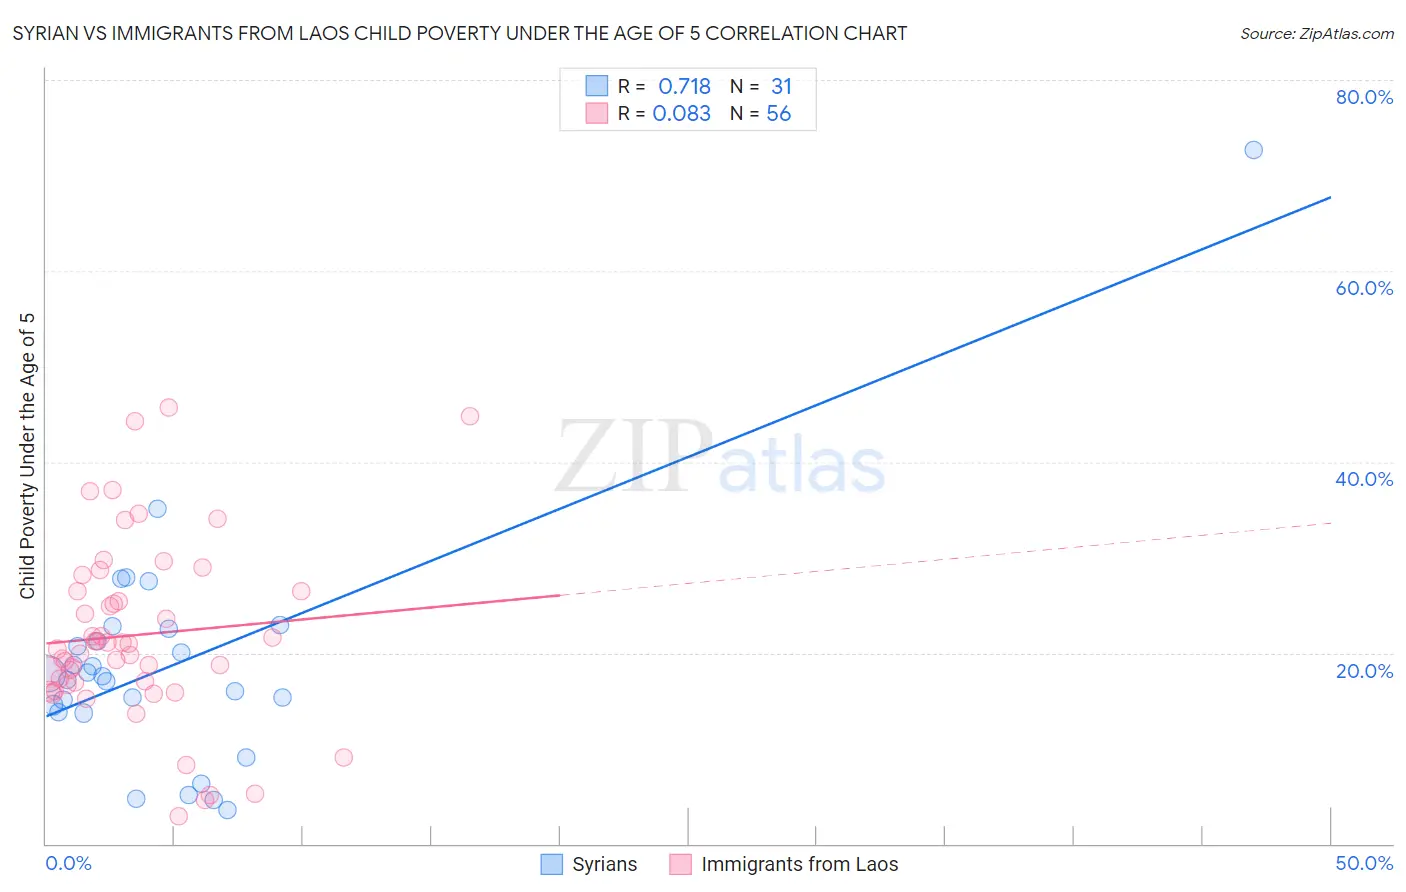 Syrian vs Immigrants from Laos Child Poverty Under the Age of 5